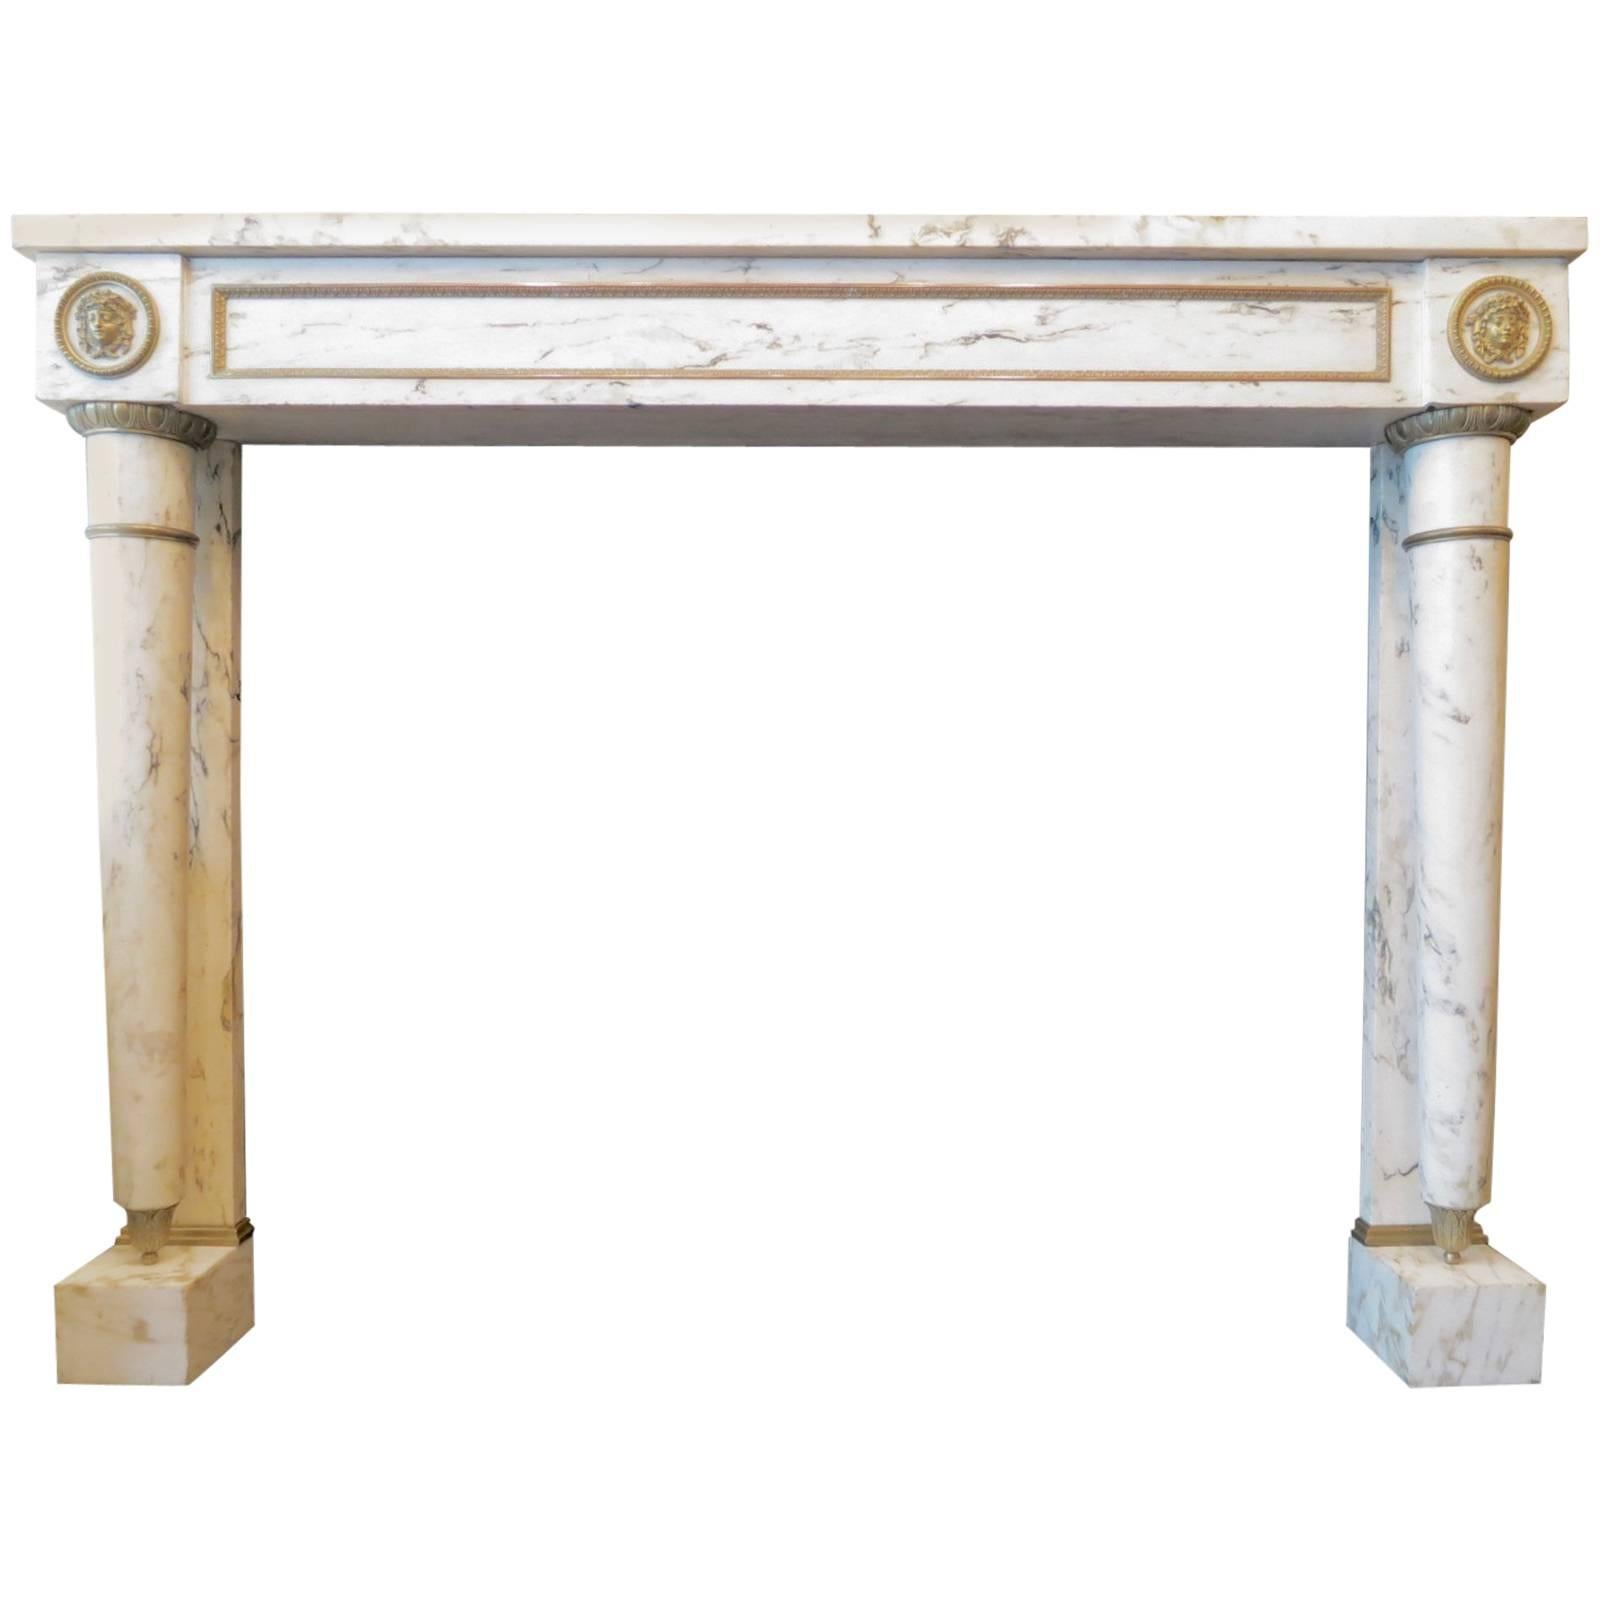 19th Century French Empire Style Fireplace Mantel in Breche Marble